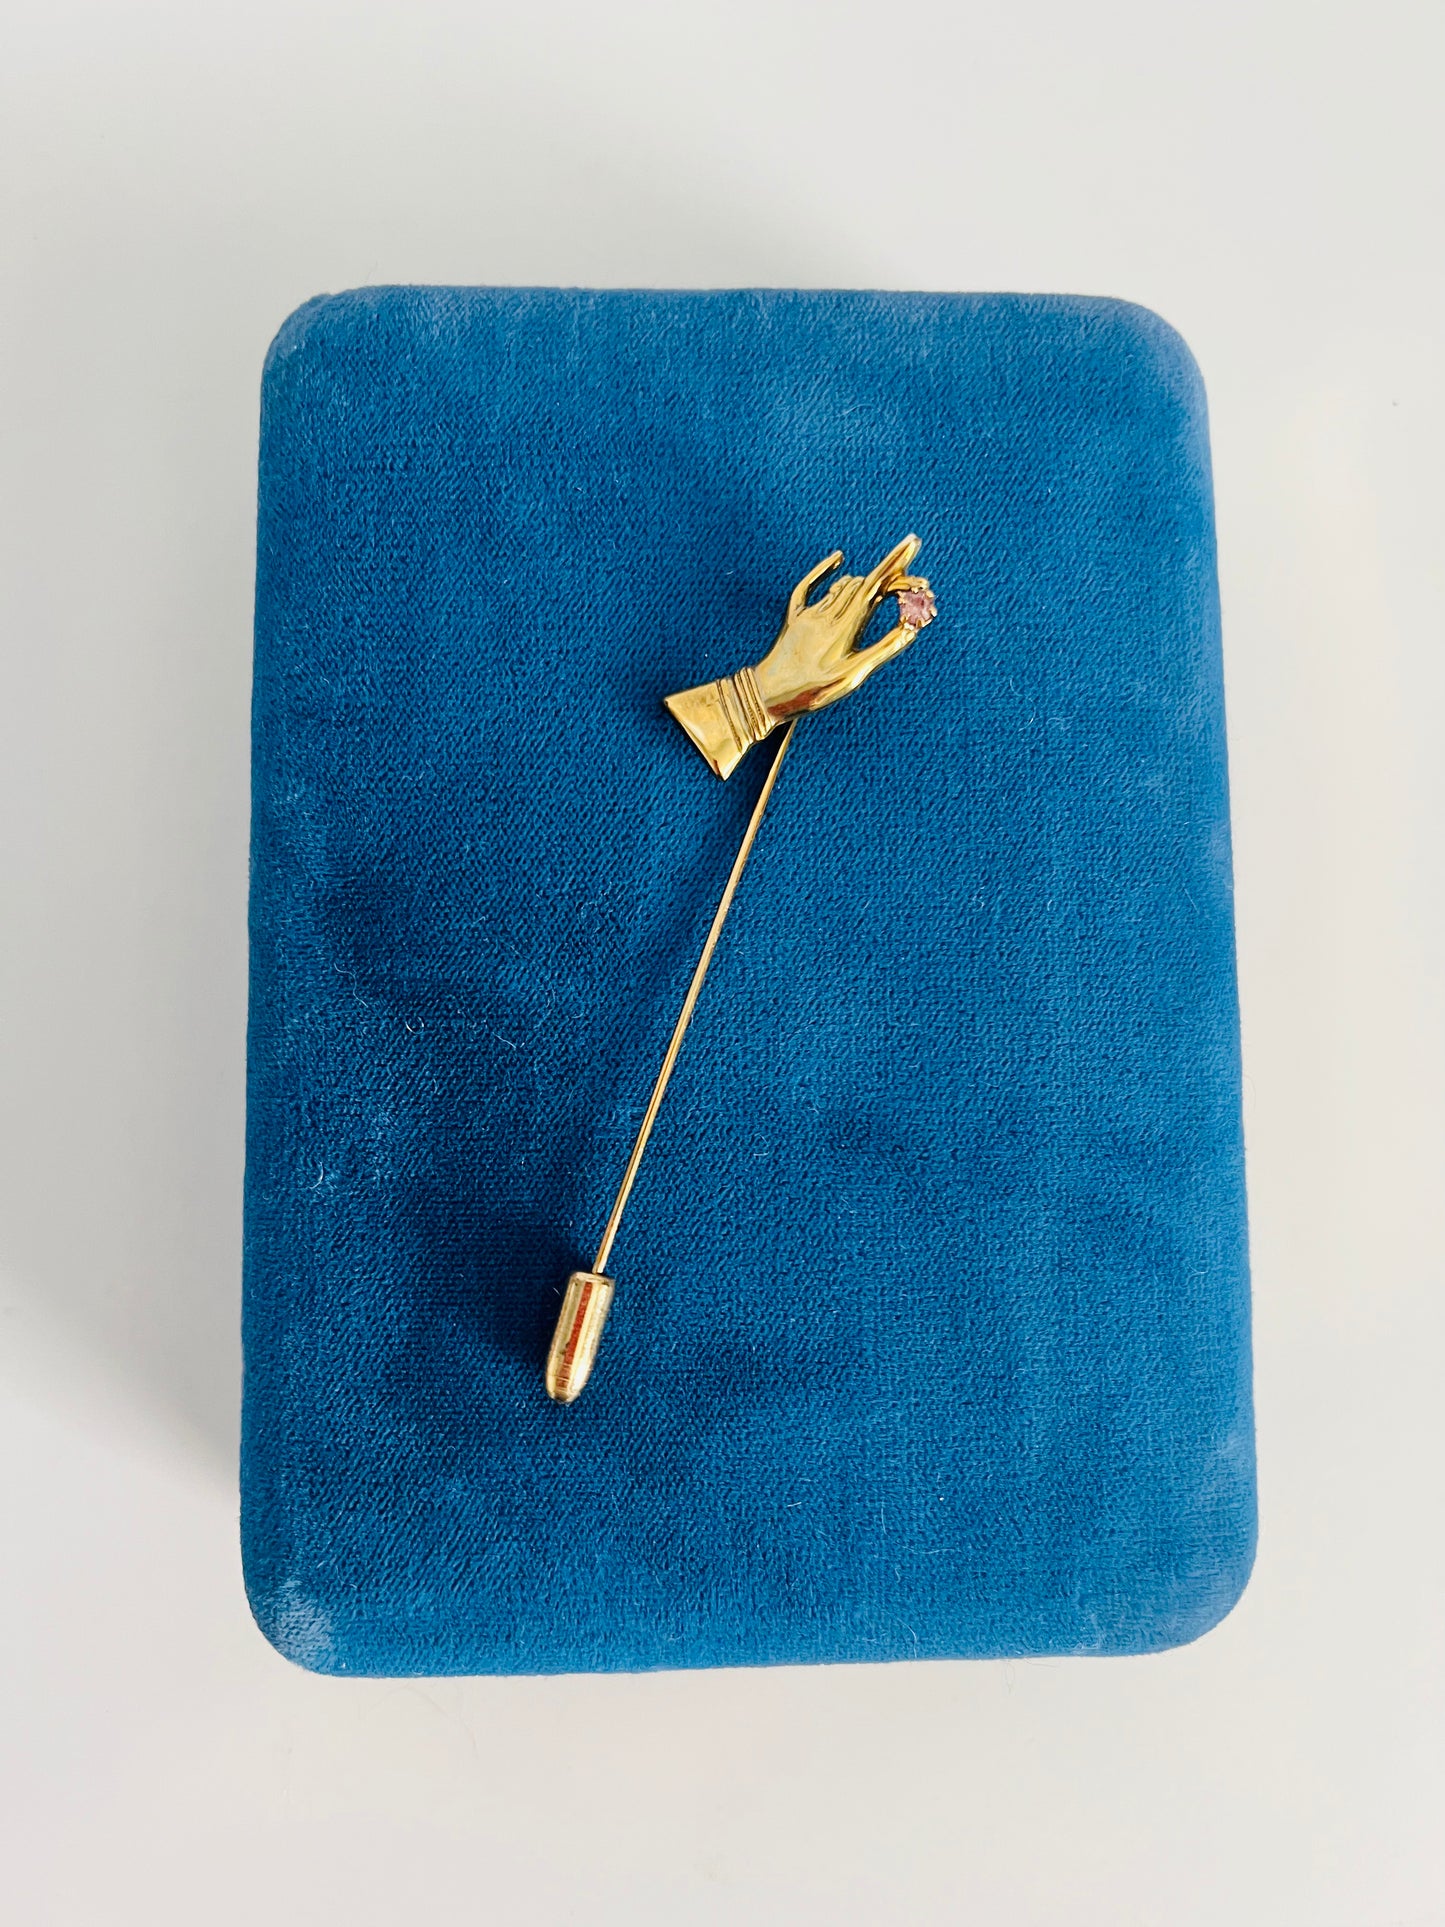 Deadstock Vintage Gold 1970s Figural Hand Stick Pin Brooch